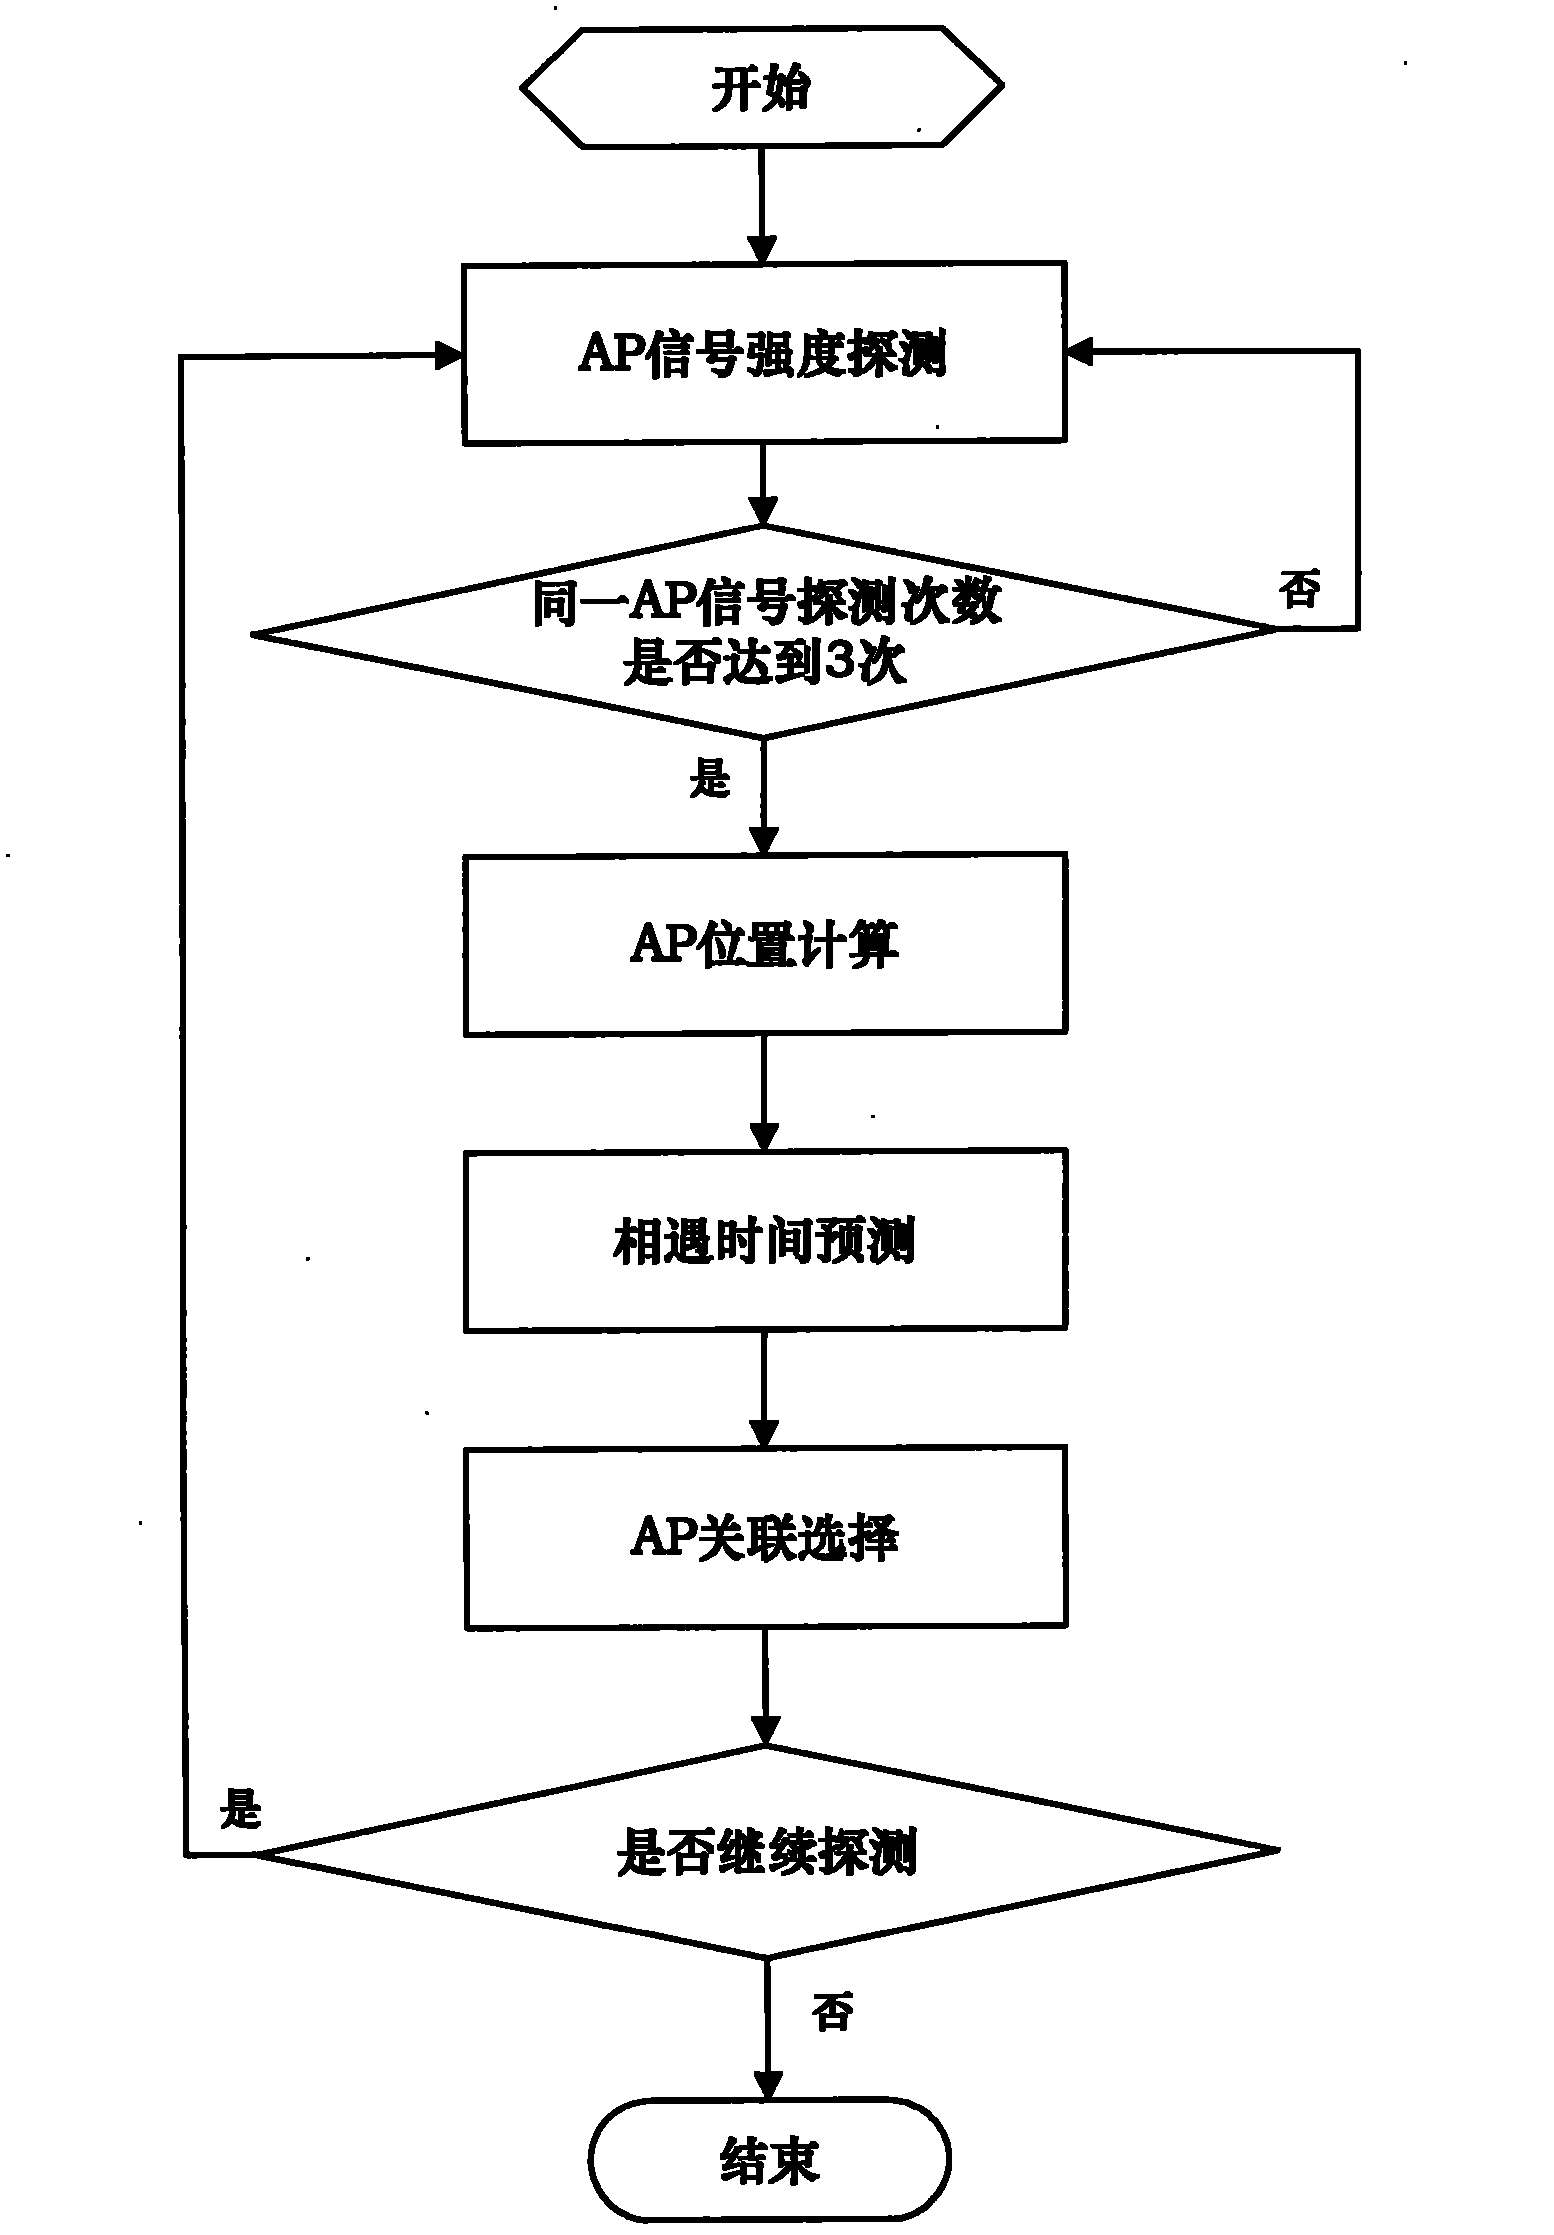 Method for selecting access point by vehicle-mounted WiFi (Wireless Fidelity) equipment